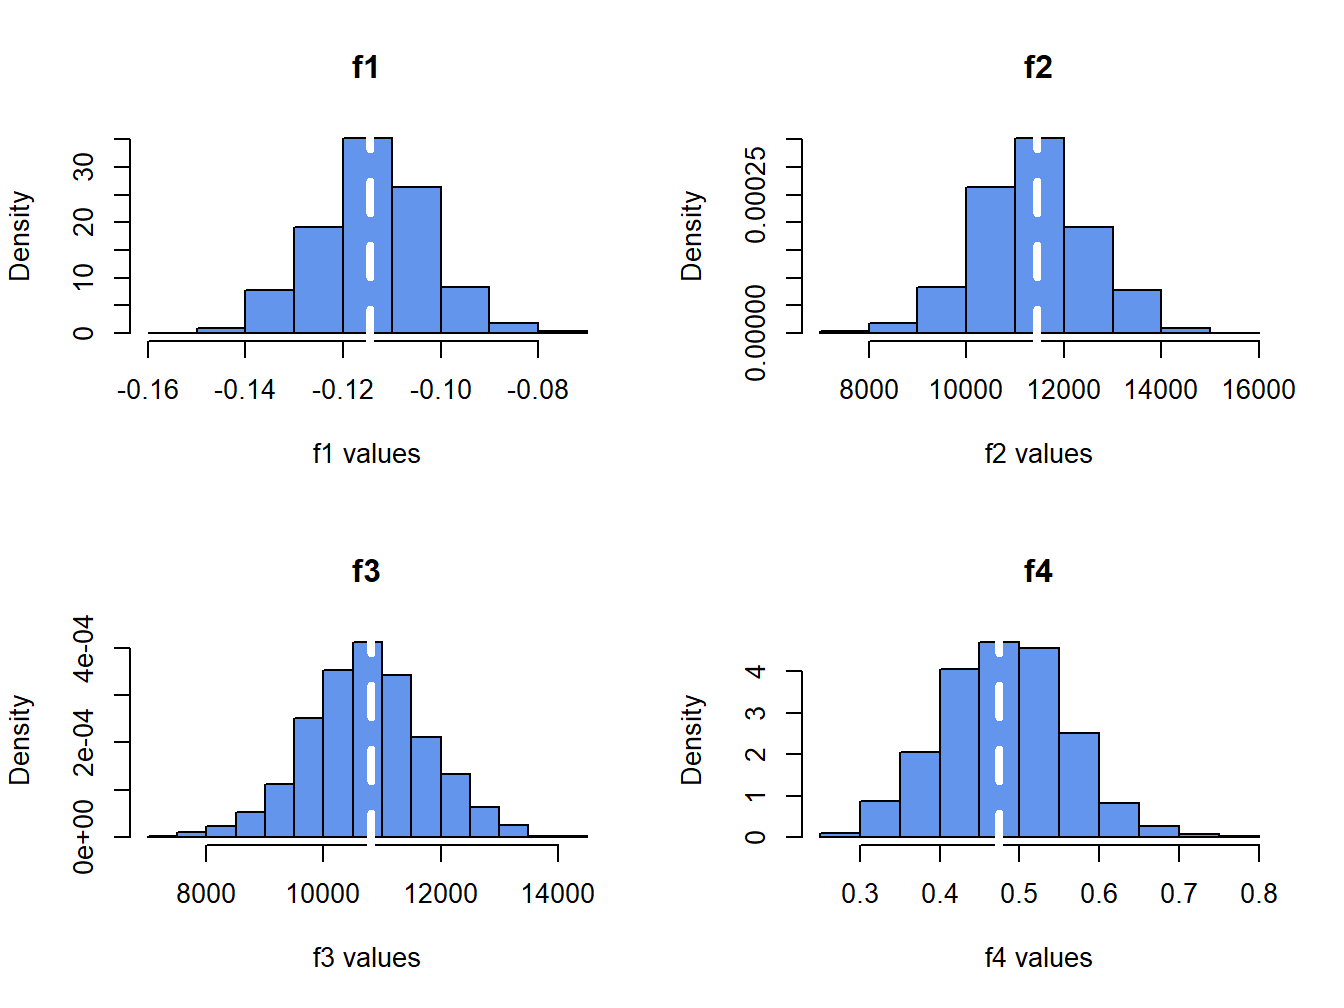 Histograms of $\hat{f}_{j}$ (for $j=1,\ldots, 4$) computed from $N=1000$ Monte Carlo samples from the GWN model.